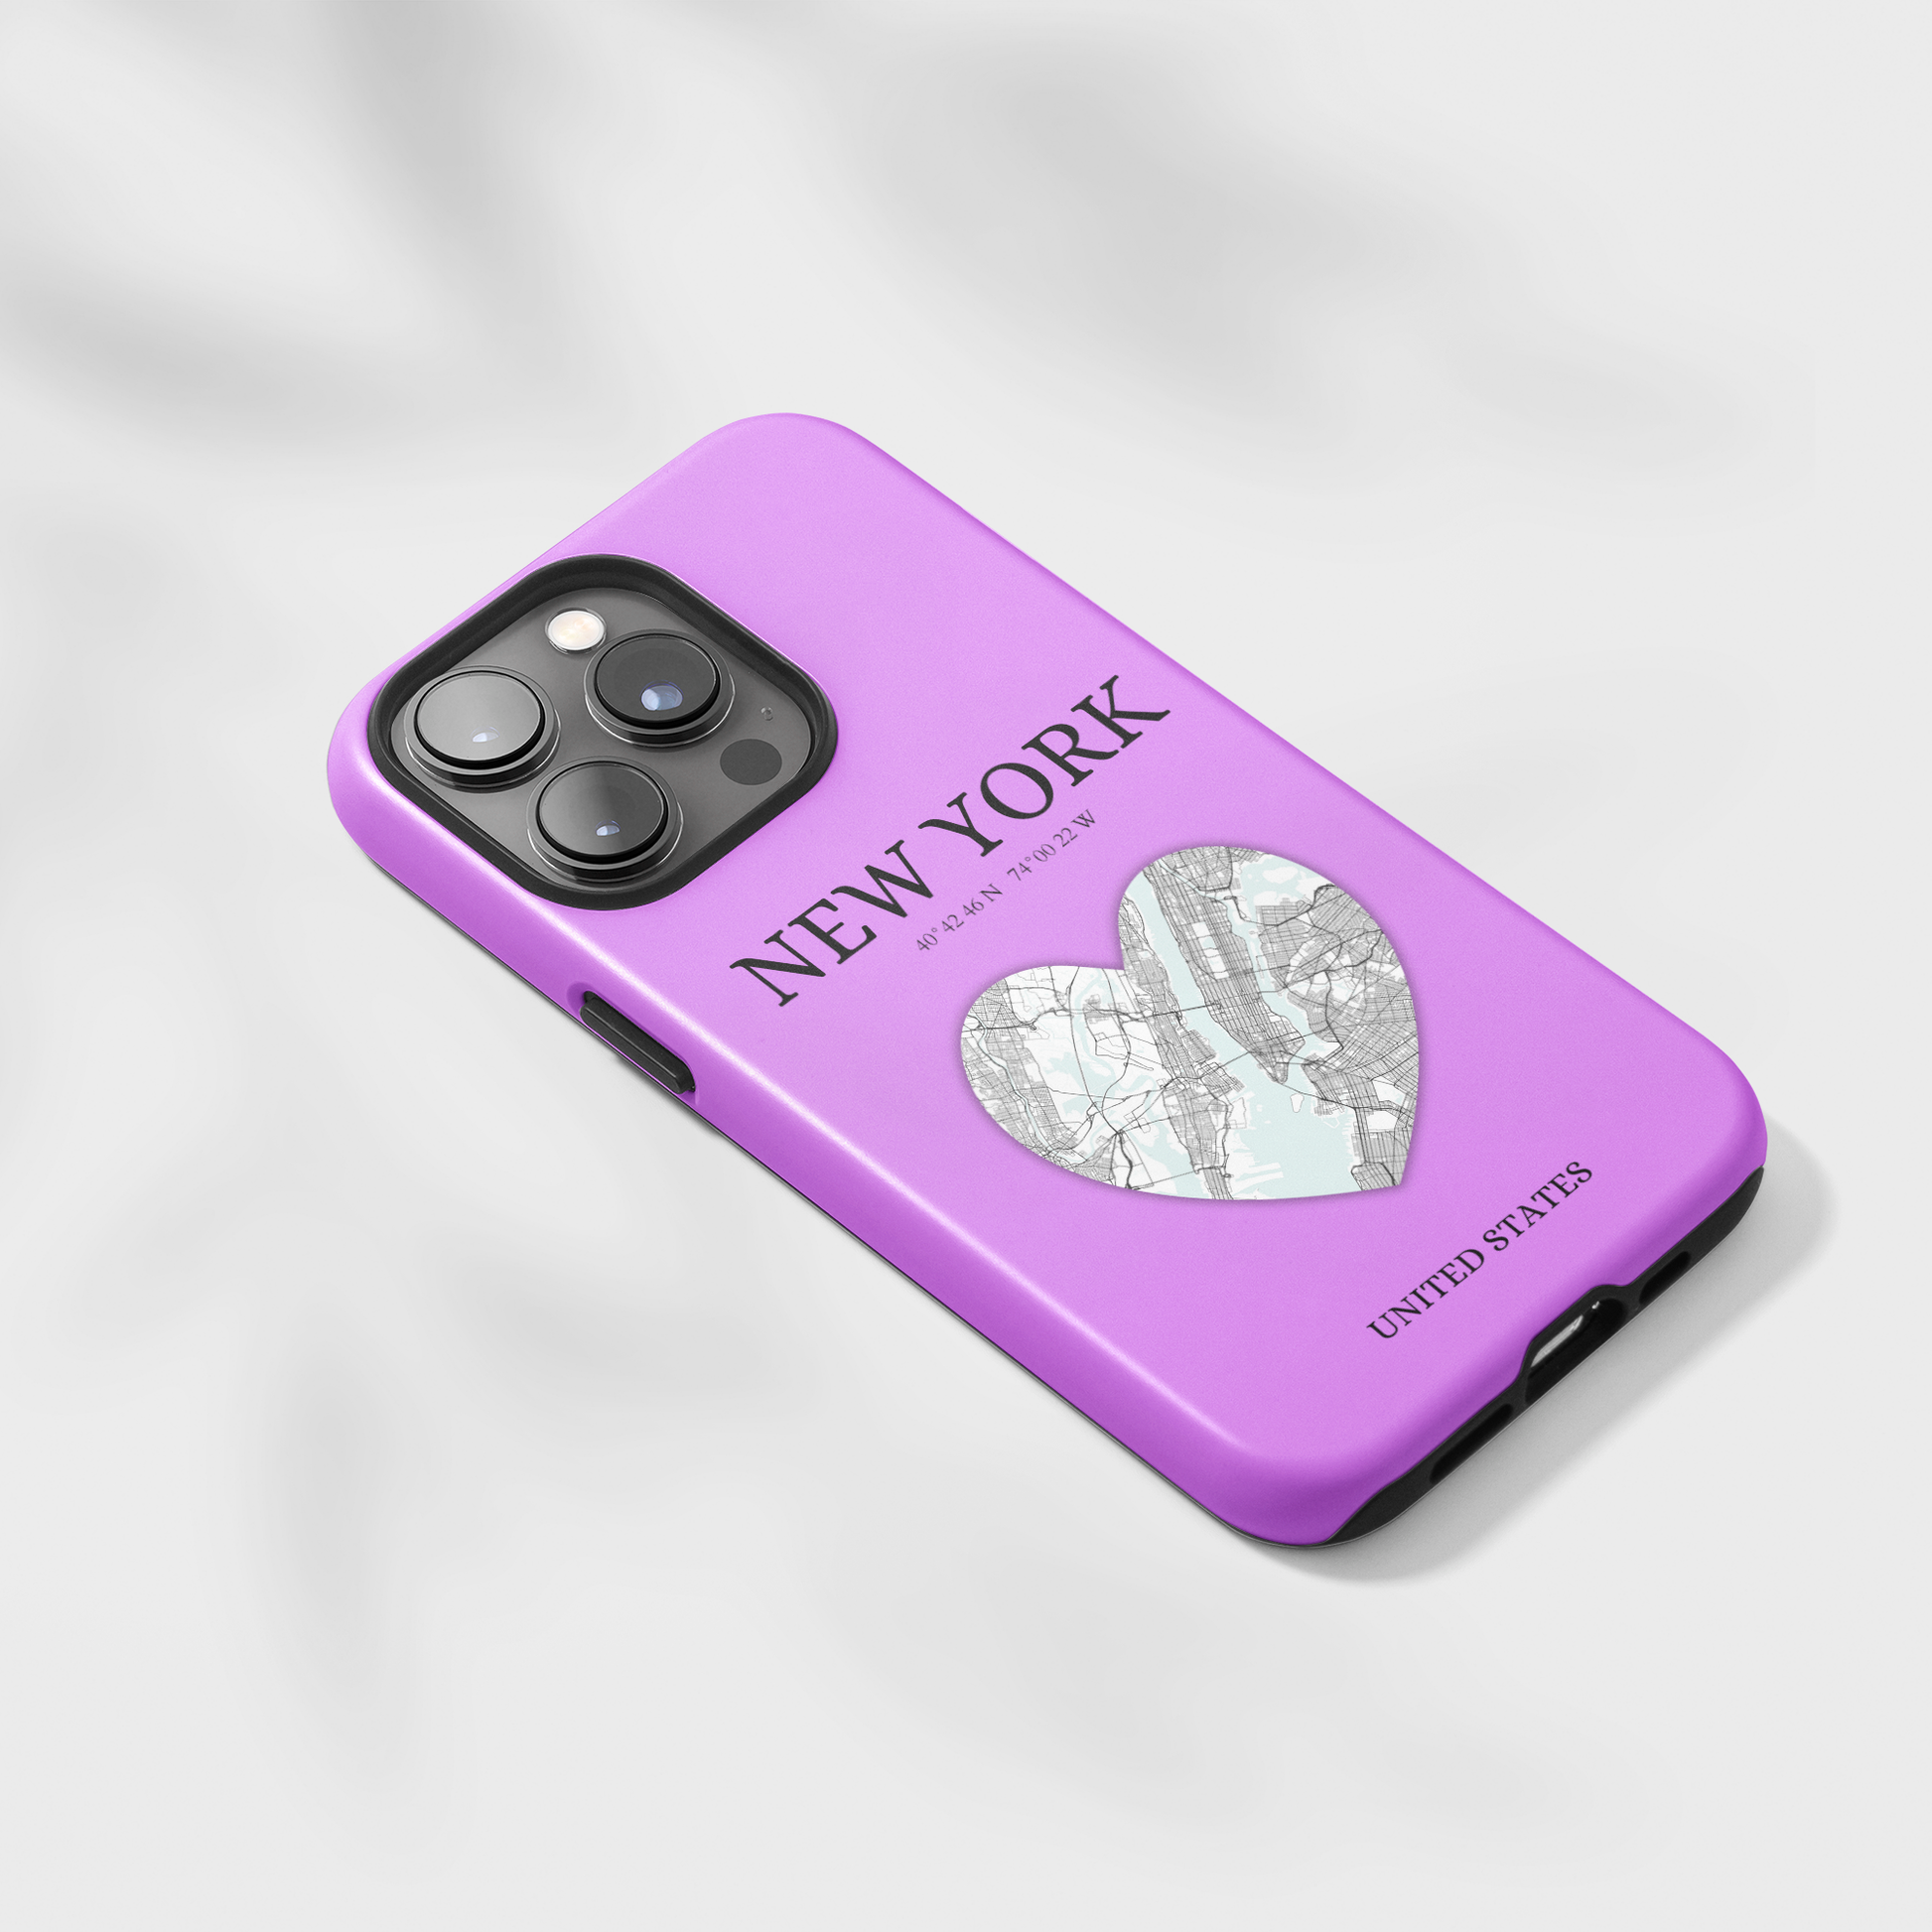 Secure your iPhone 11-15 with RIMA's durable case: Polycarbonate shell, rubber lining for shock absorption, and supports wireless charging-York Heartbeat - Purple (iPhone Case 11-15)